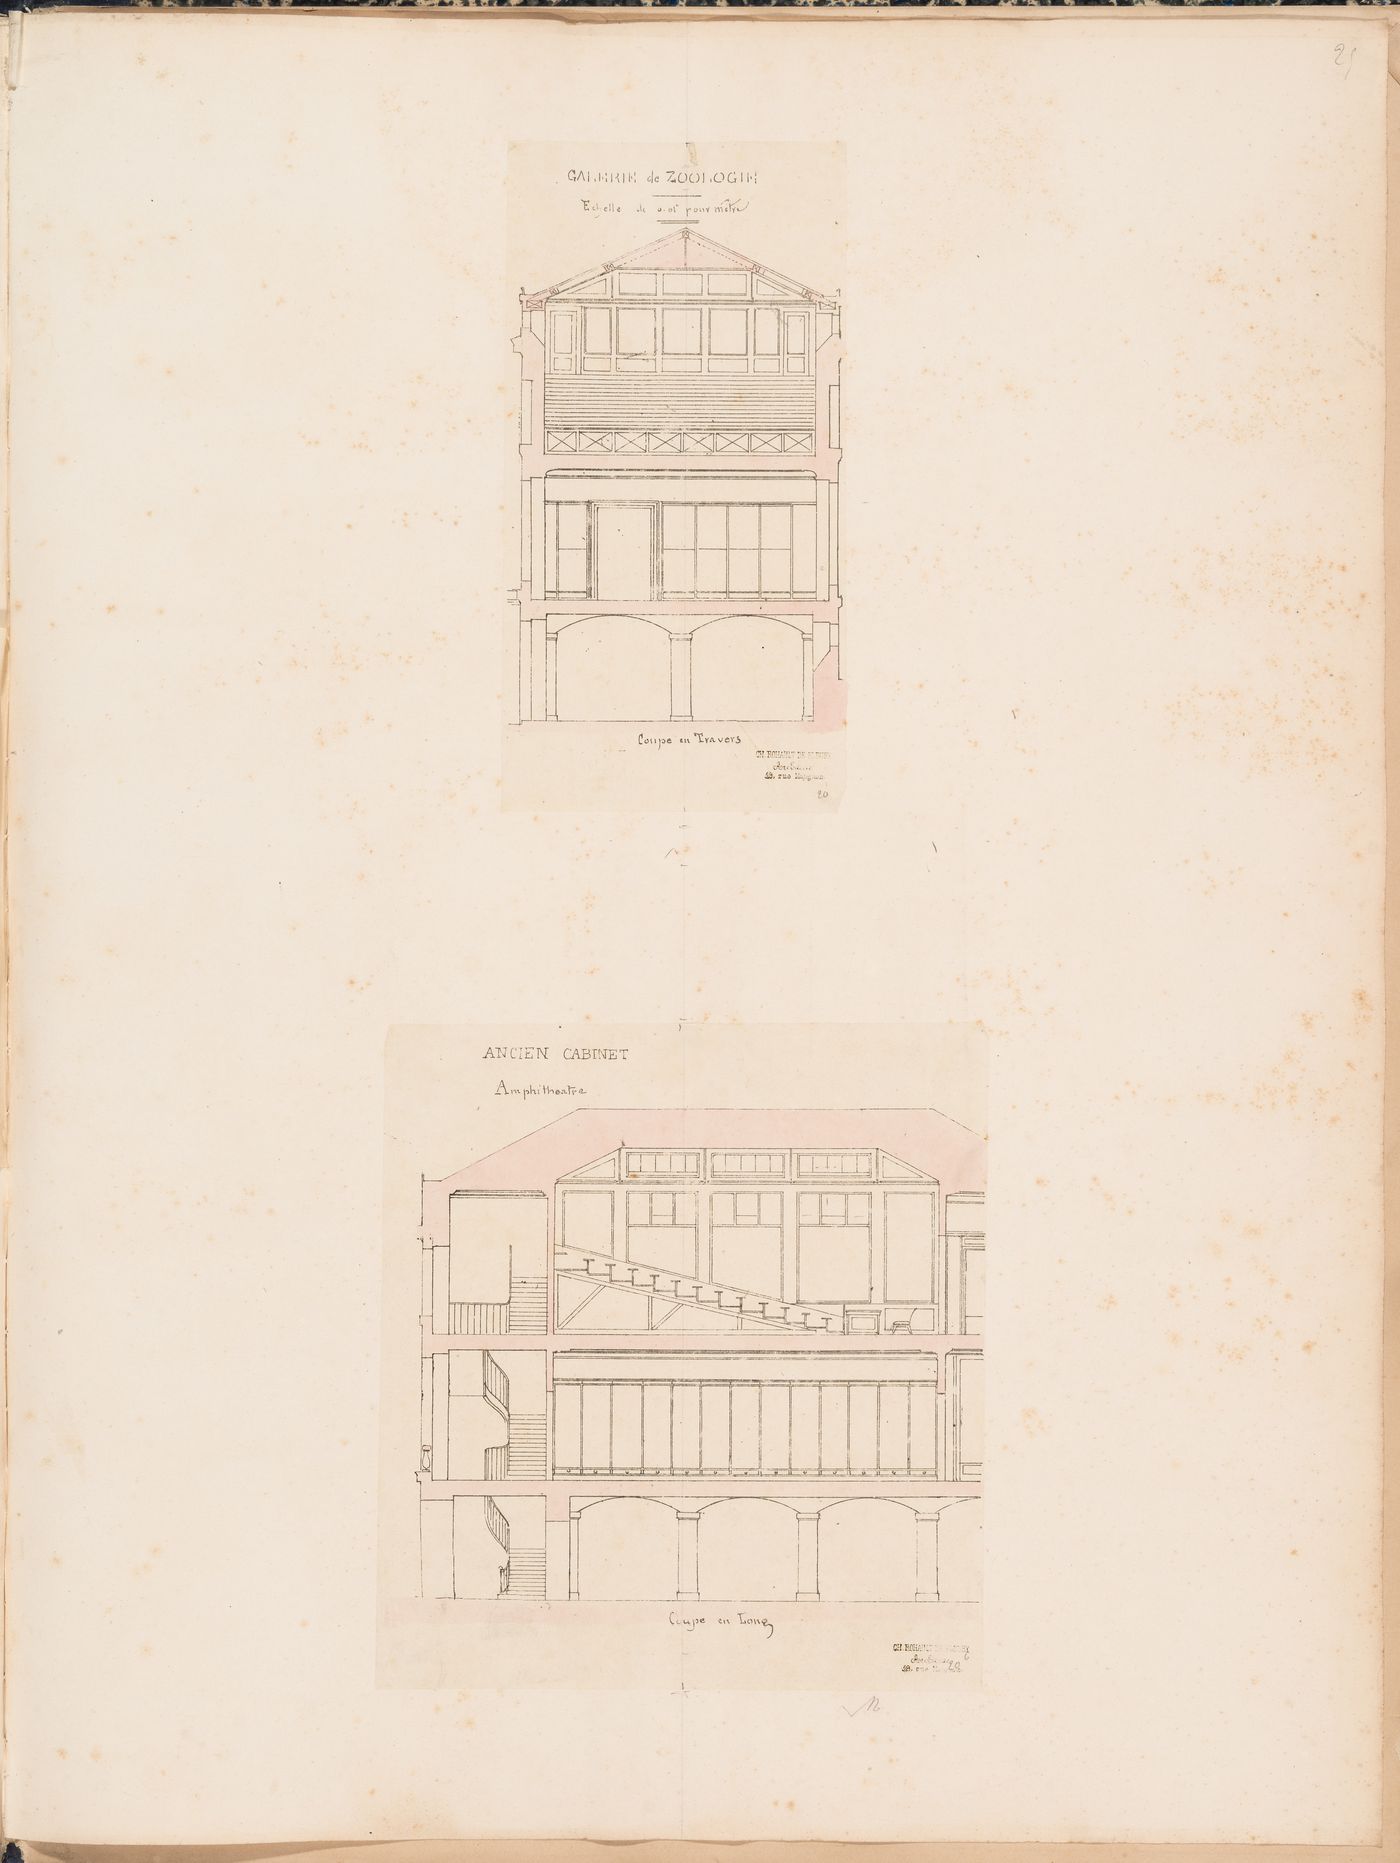 Project for a Galerie de zoologie, 1846: Cross and longitudinal sections for the amphitheatre